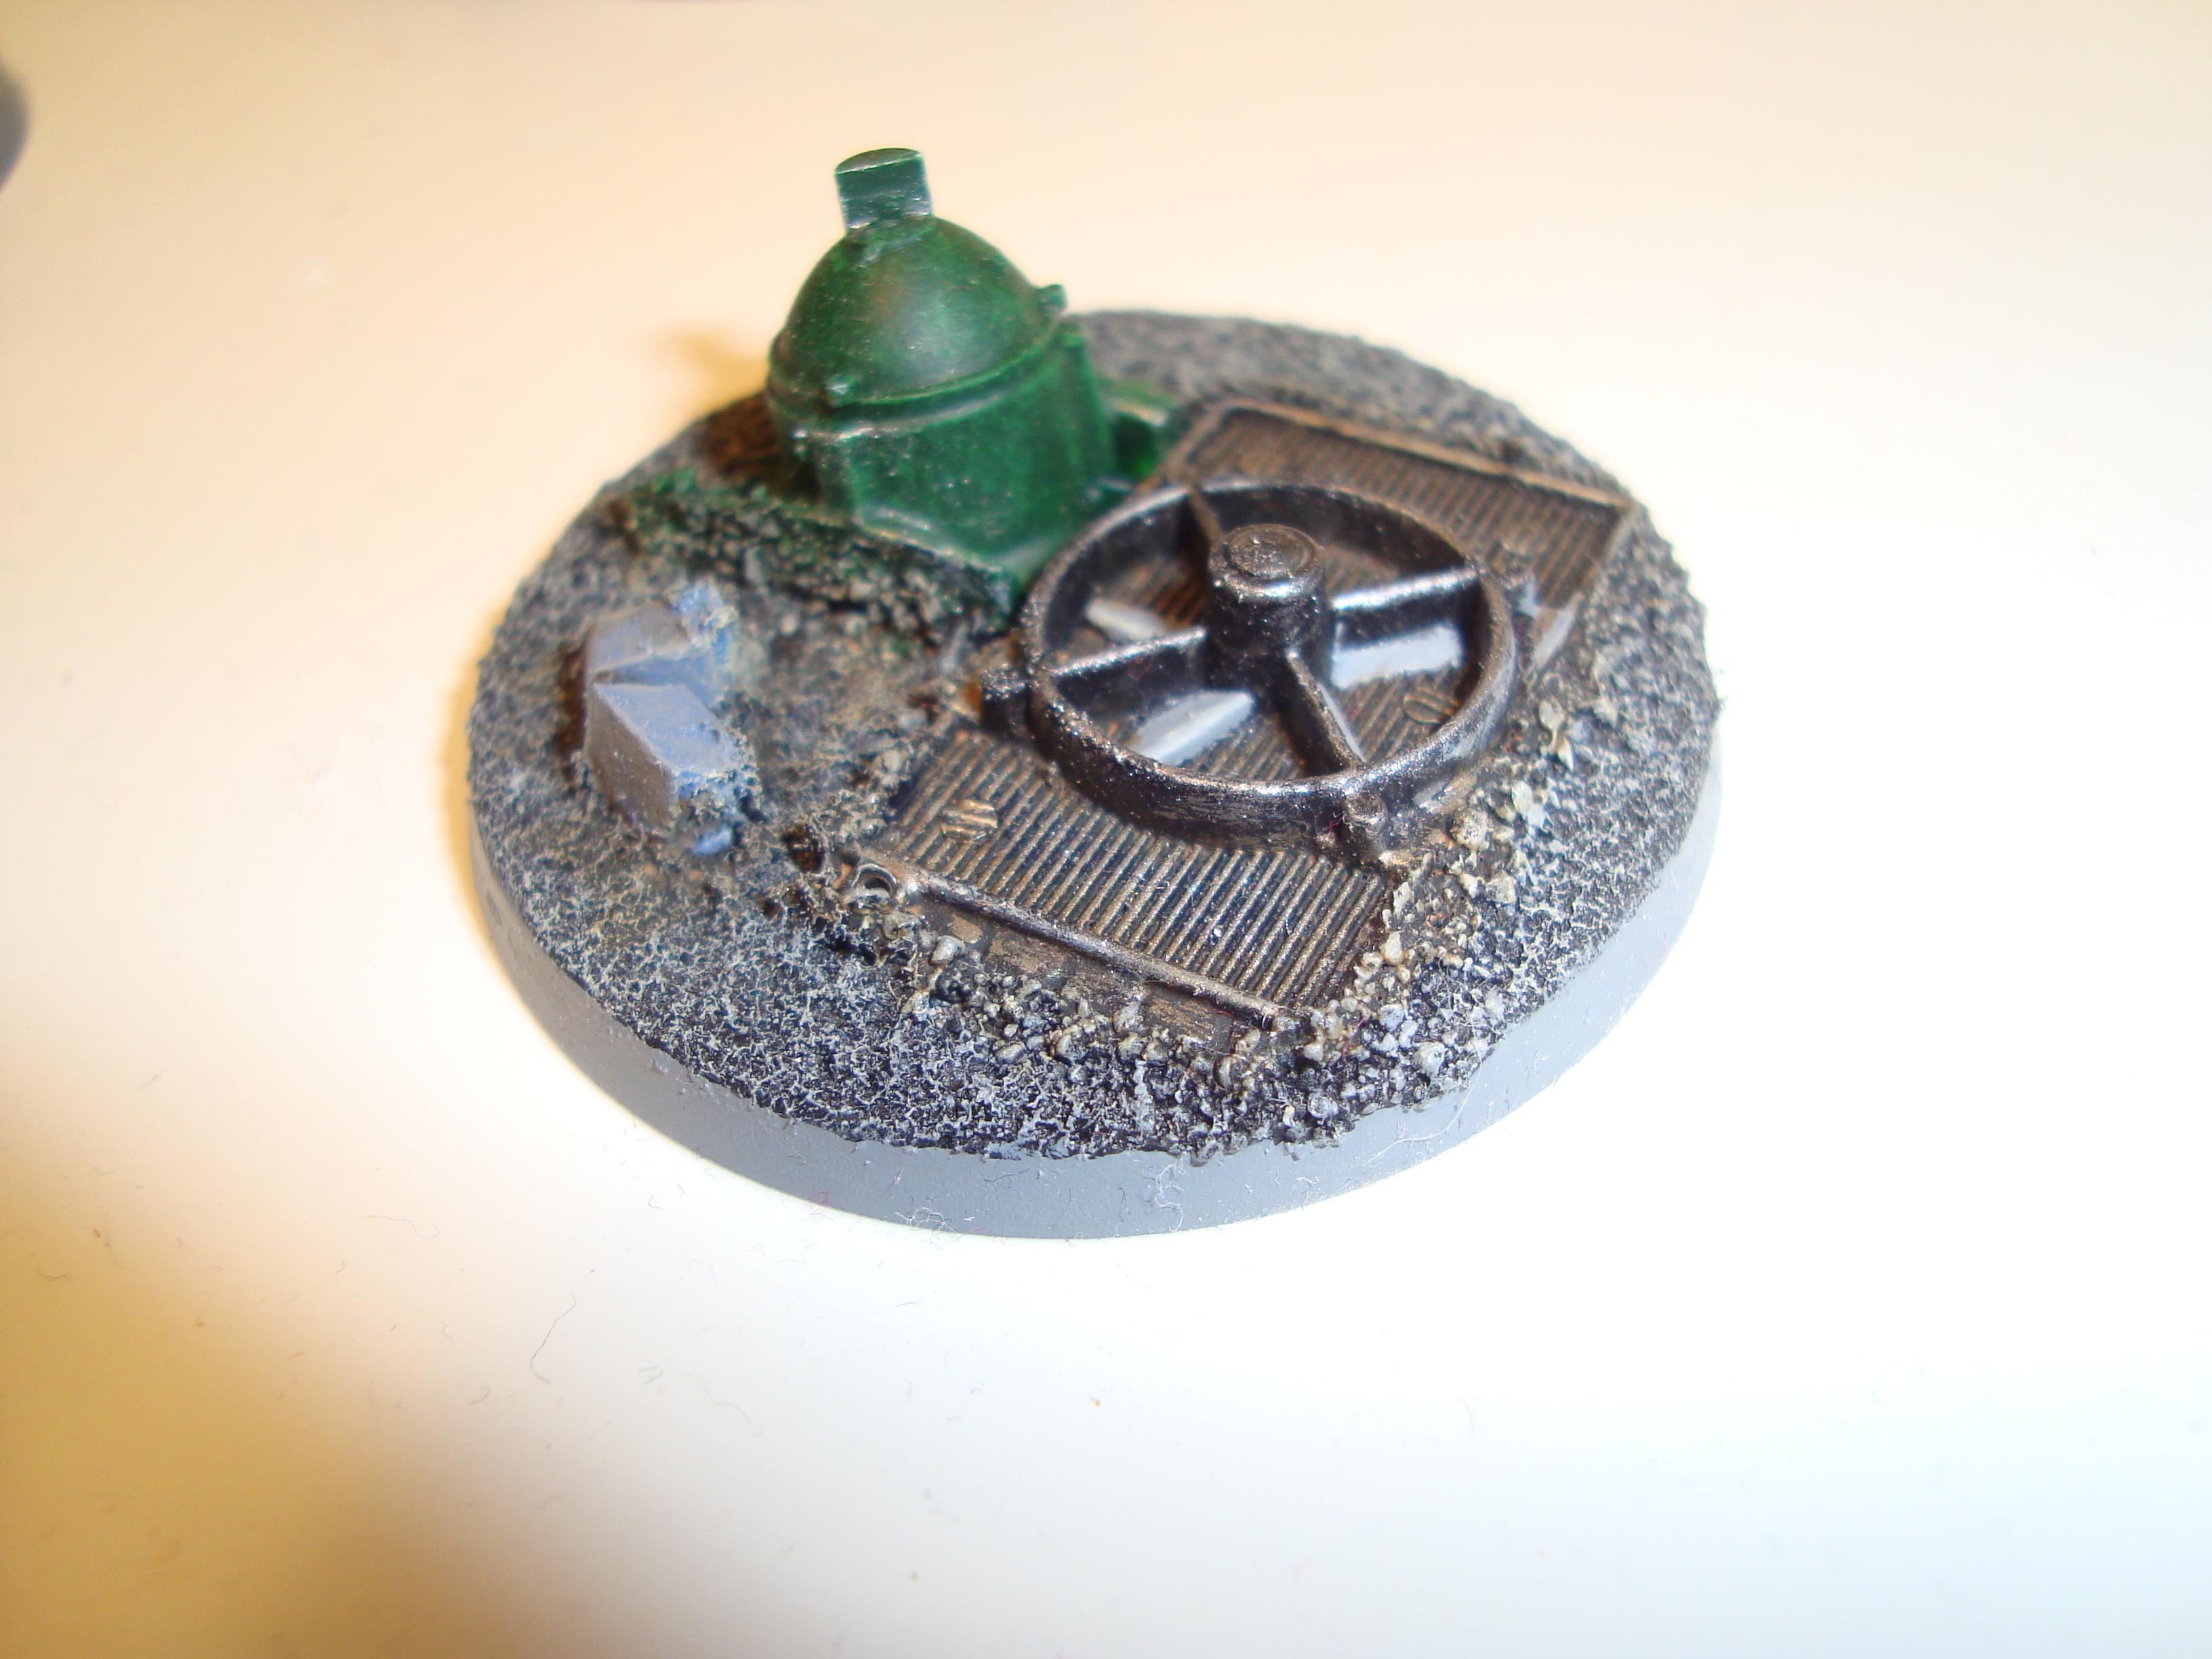 Objective Marker, Objective markers